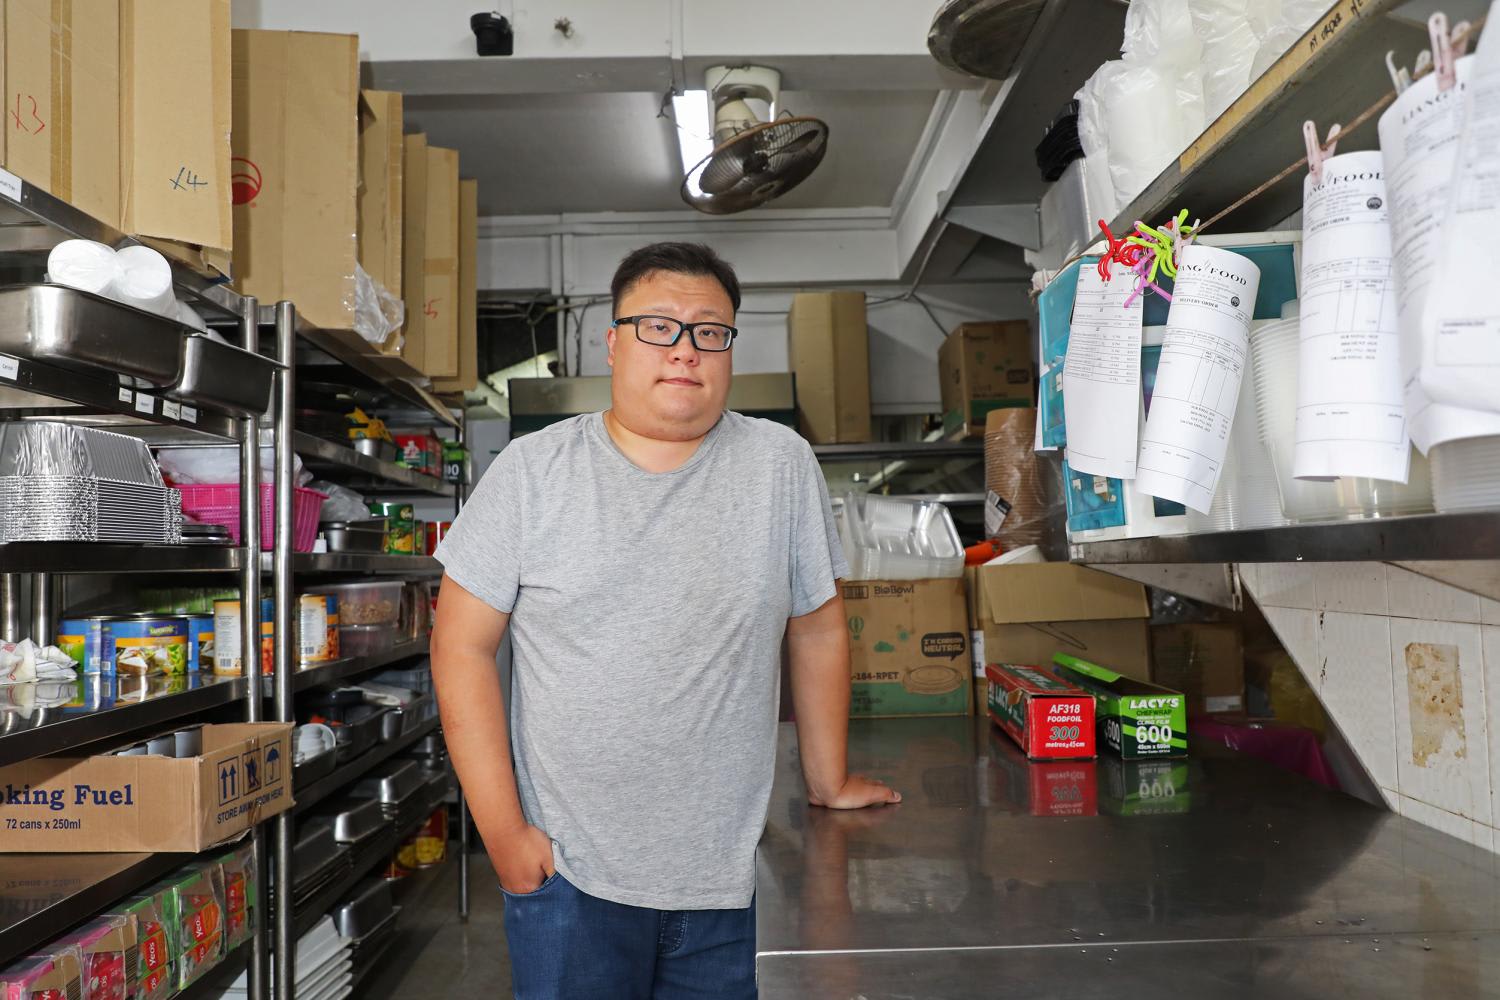 Mr Foo Zhi Yang, 30, is the second-generation owner of Liang Food Caterer, which employs seven full-time local employees.